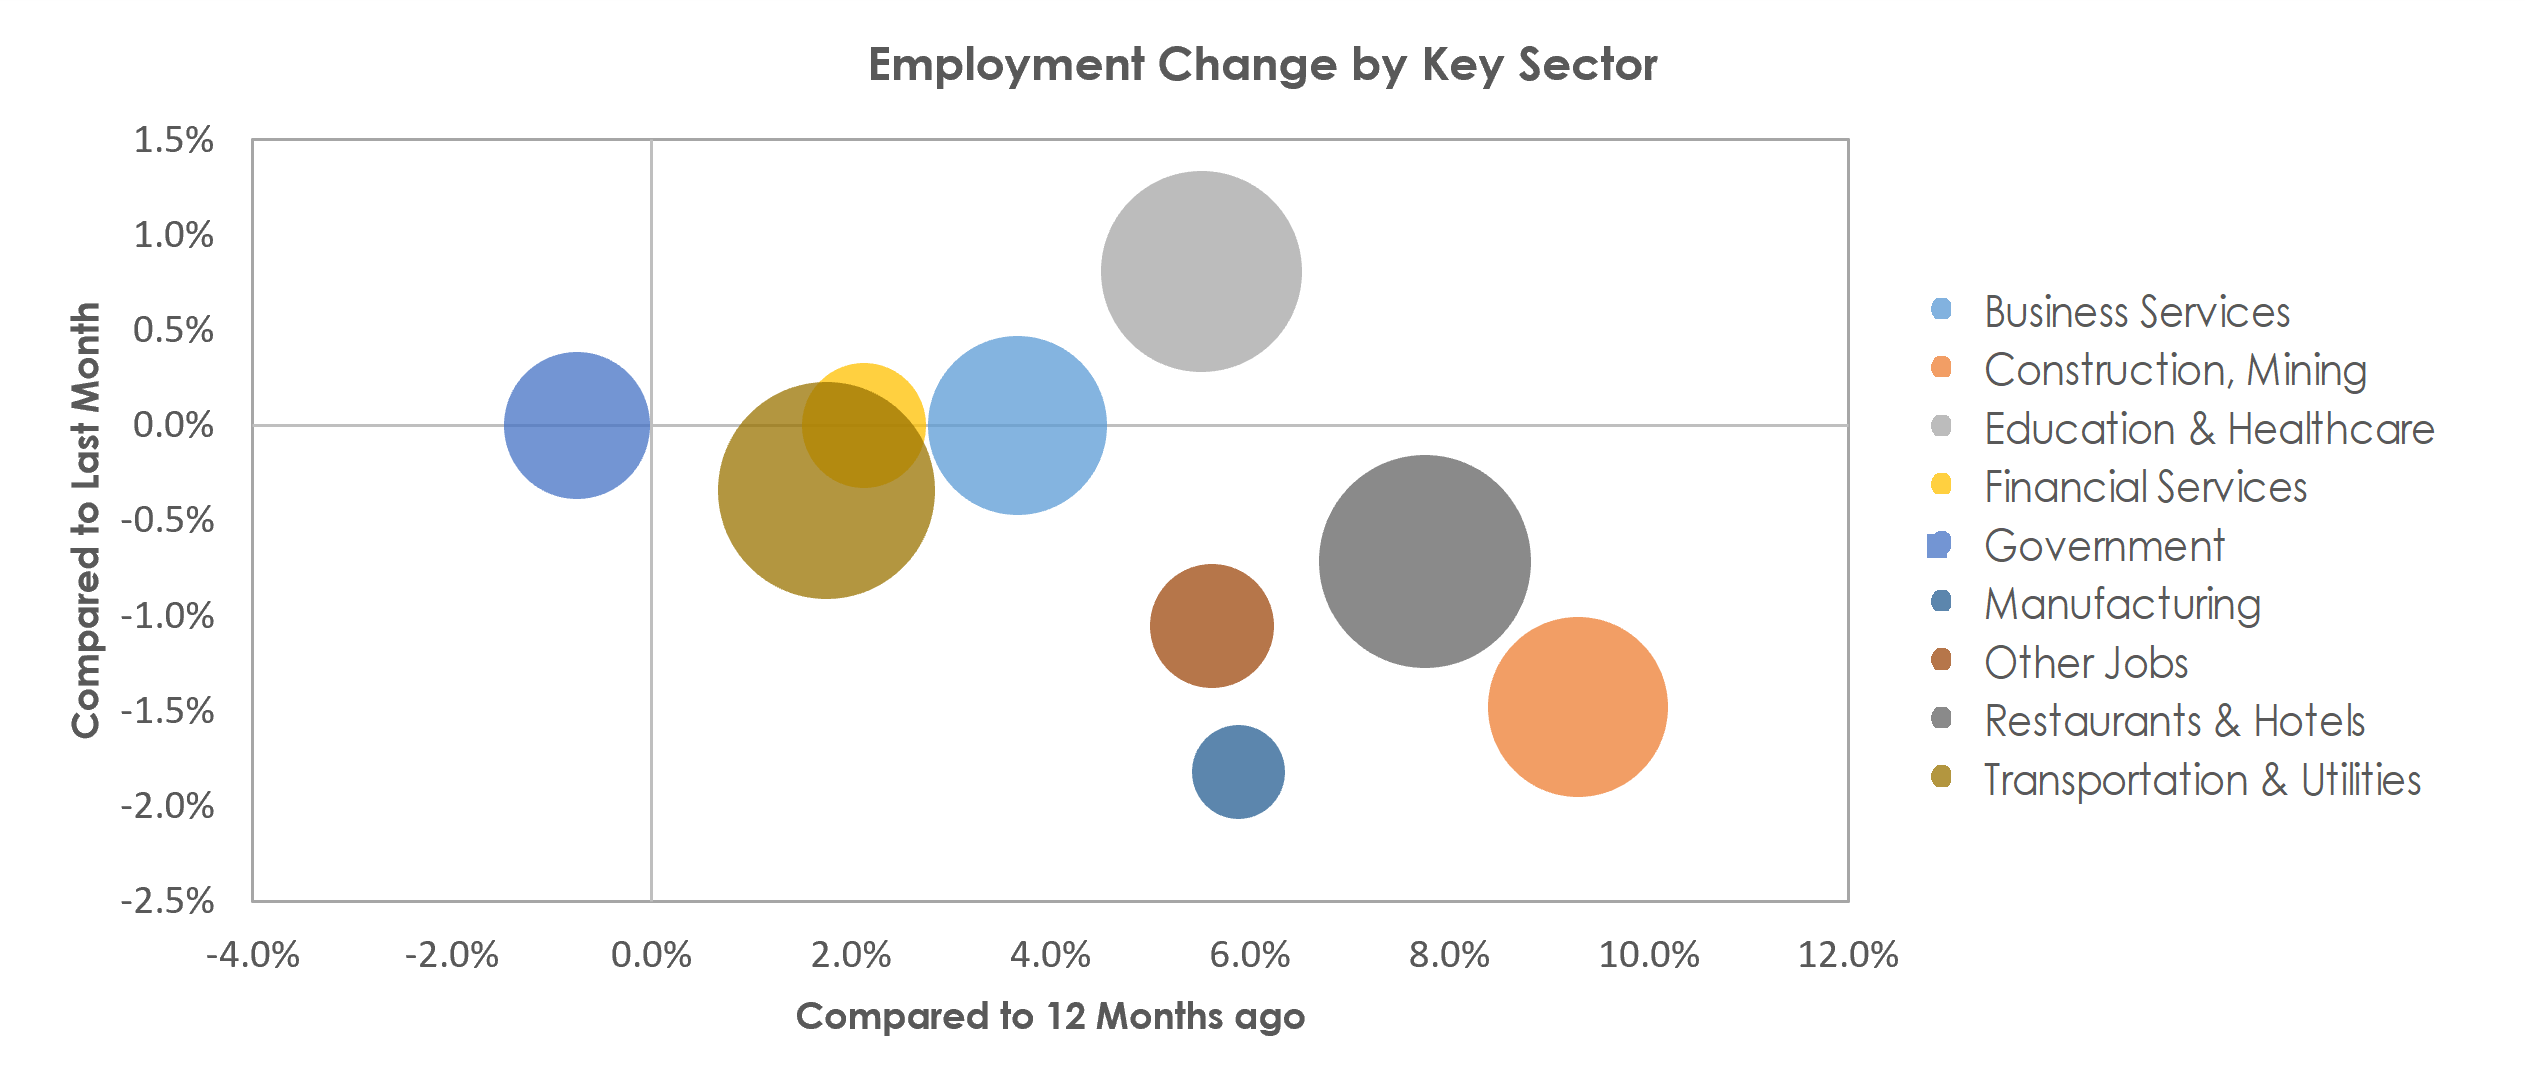 Naples-Immokalee-Marco Island, FL Unemployment by Industry September 2022